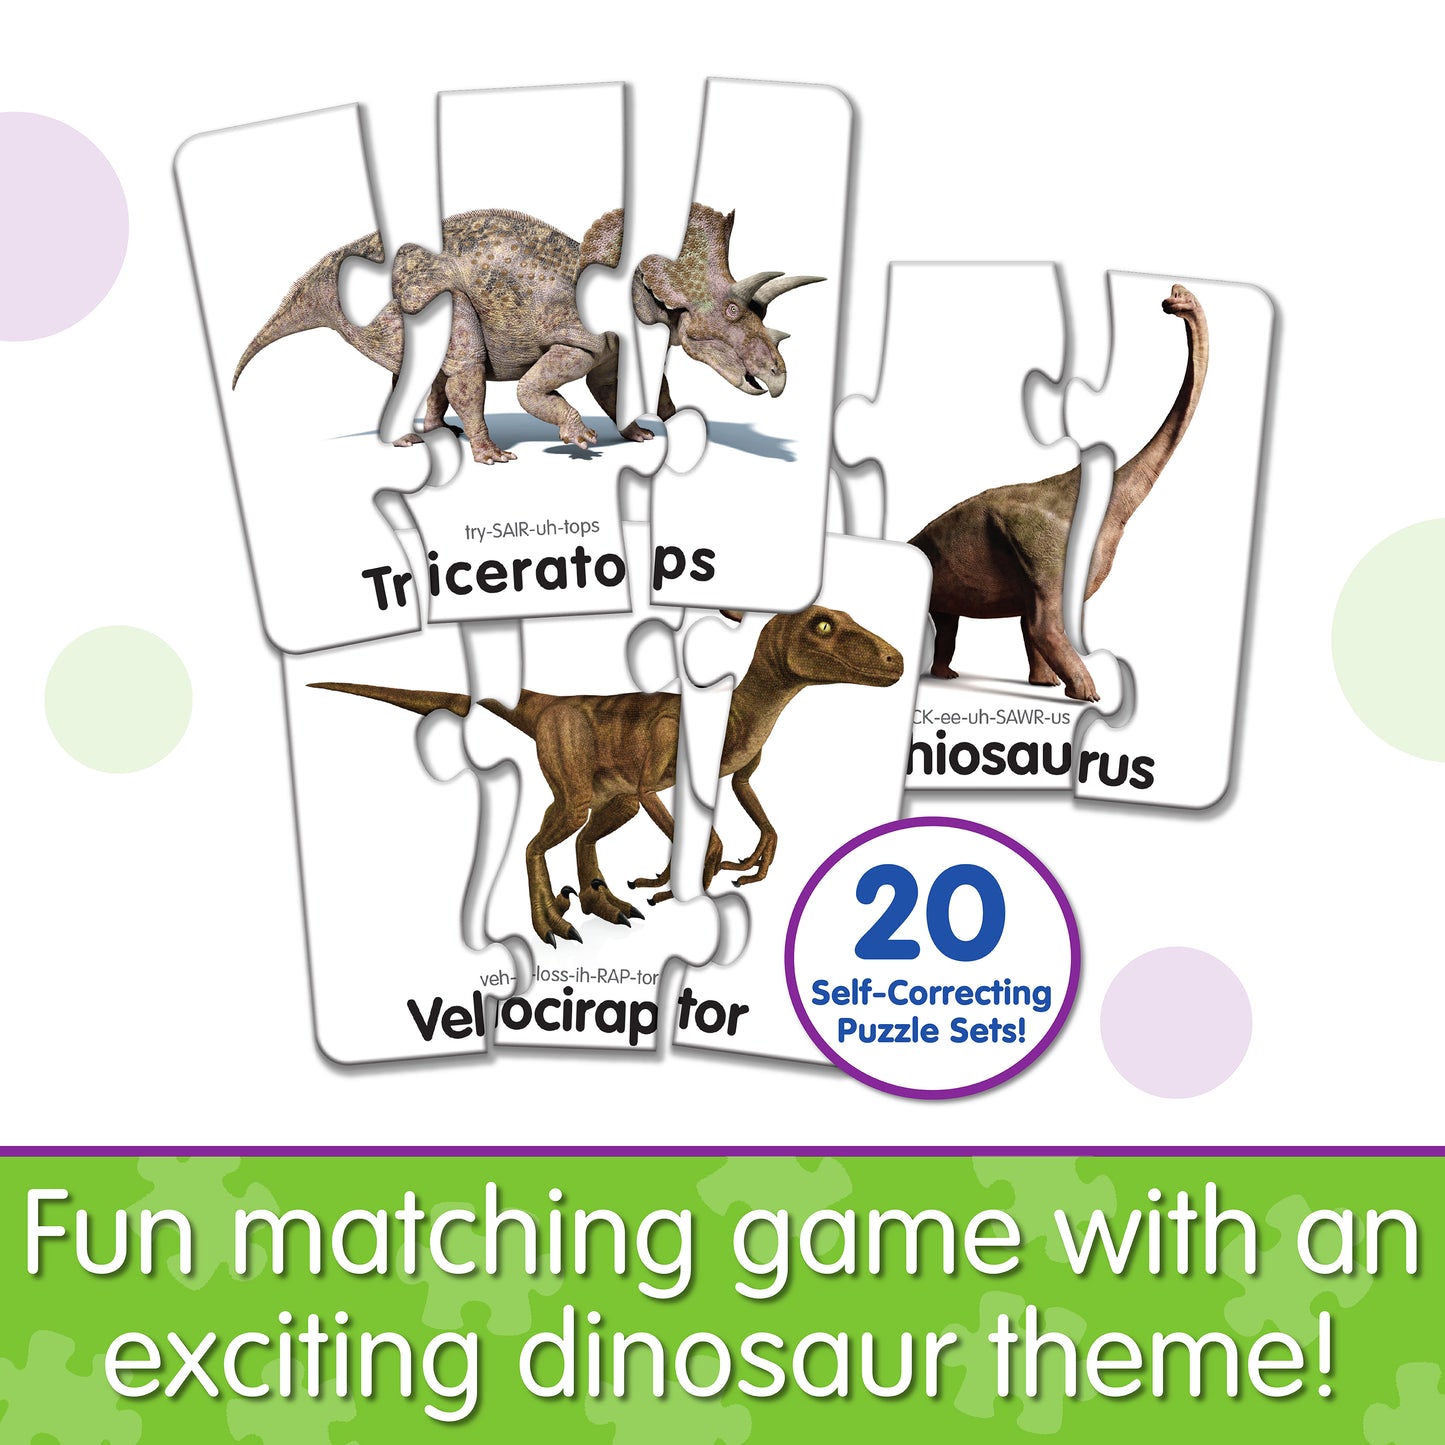 Infographic about Match It - Head to Tail Dinos that says, "Fun matching game with an exciting dinosaur theme!"